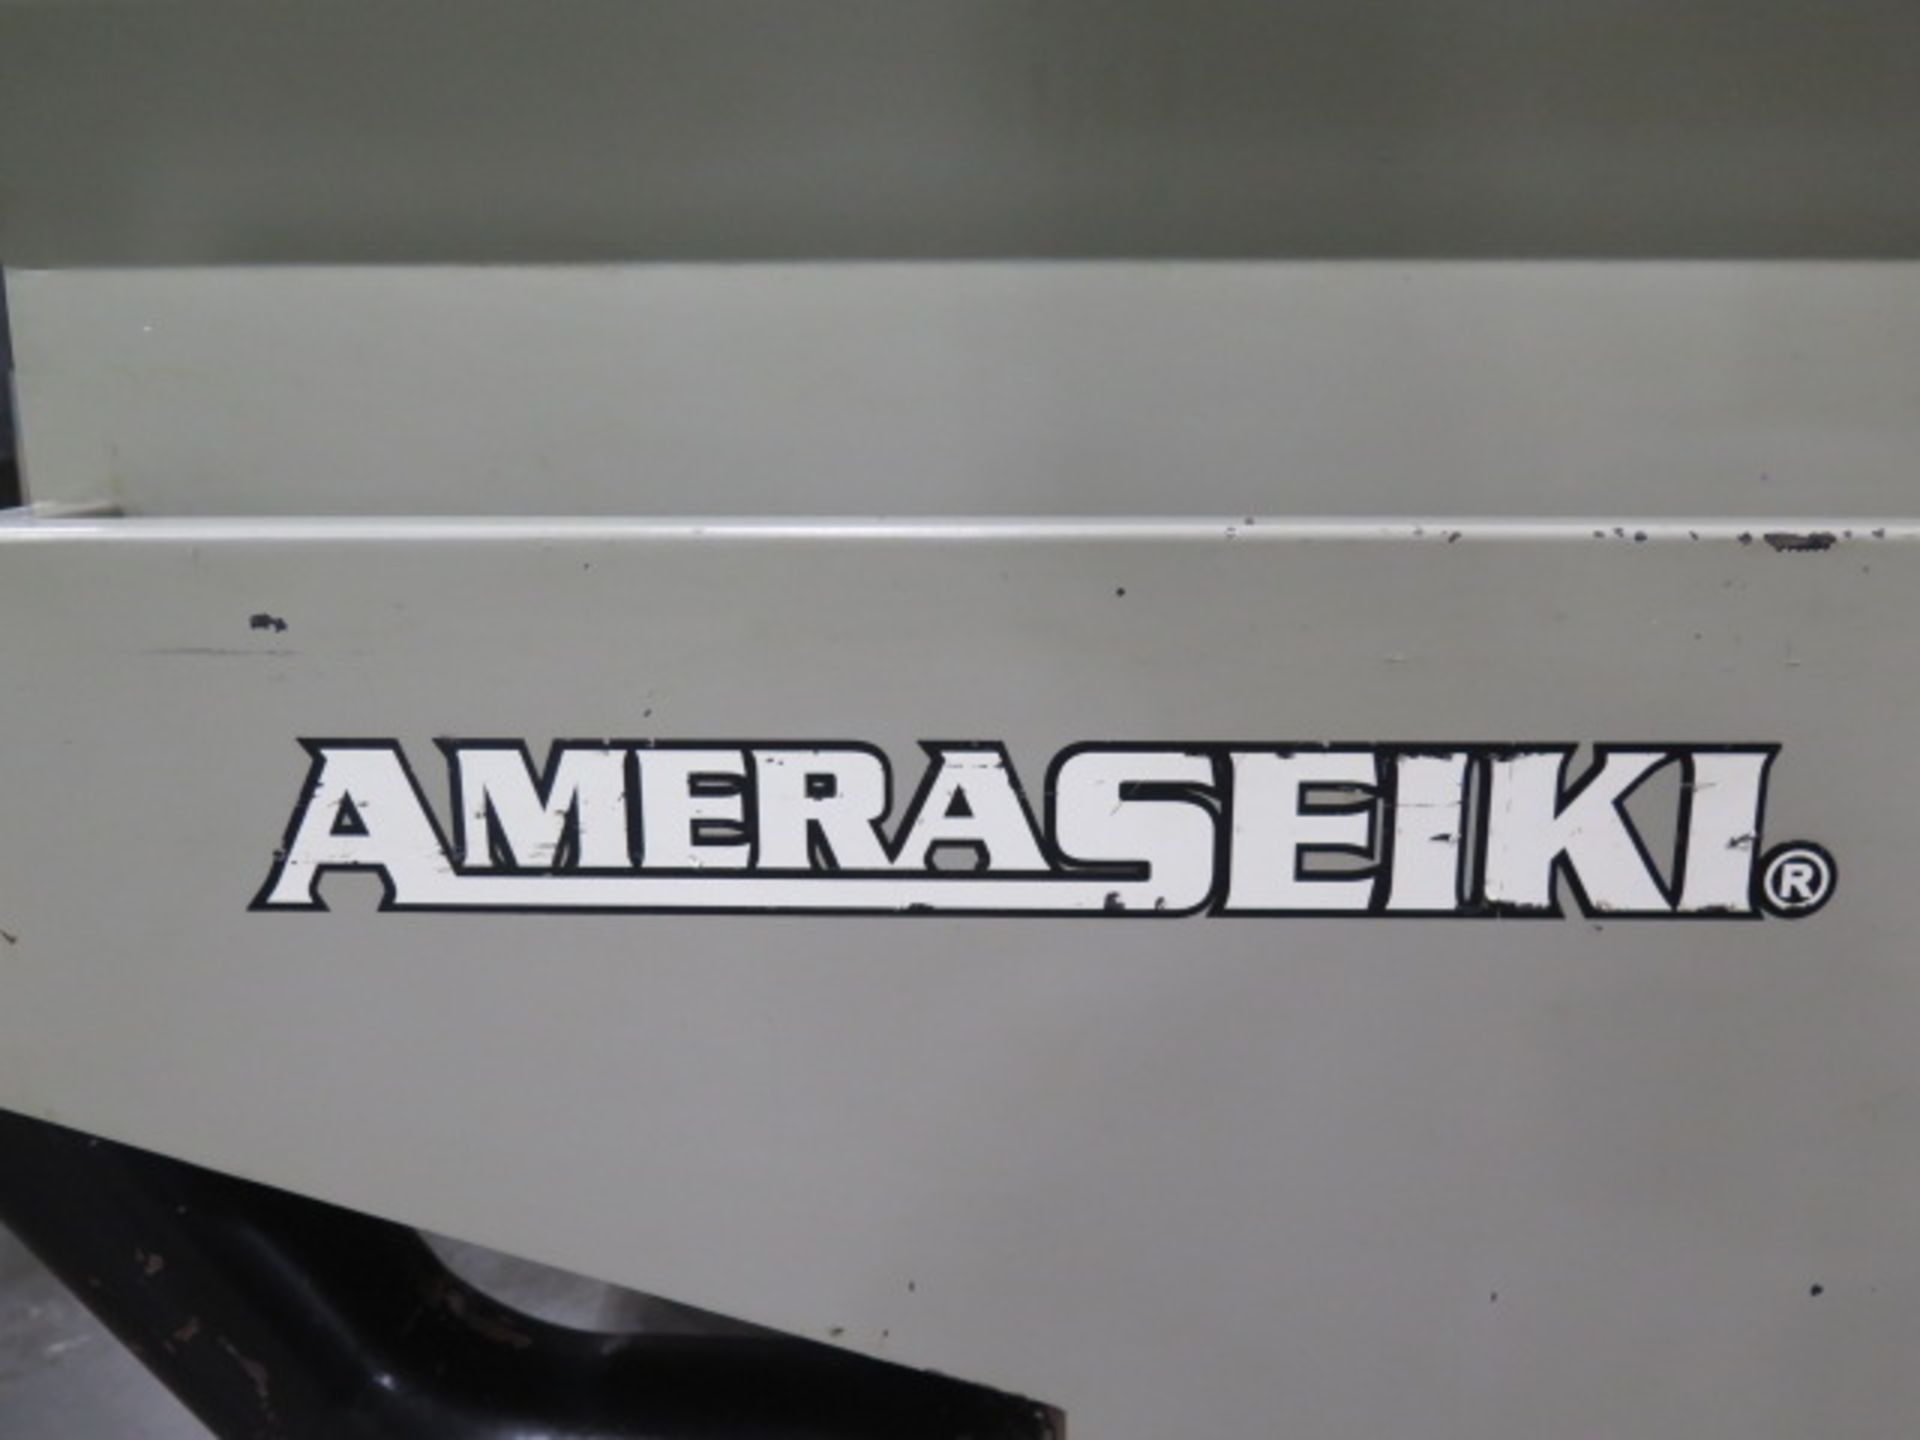 Amera Seiki A-3 CNC Vertical Machining Center w/ Fanuc Series 21i-MB Controls, SOLD AS IS - Image 13 of 16